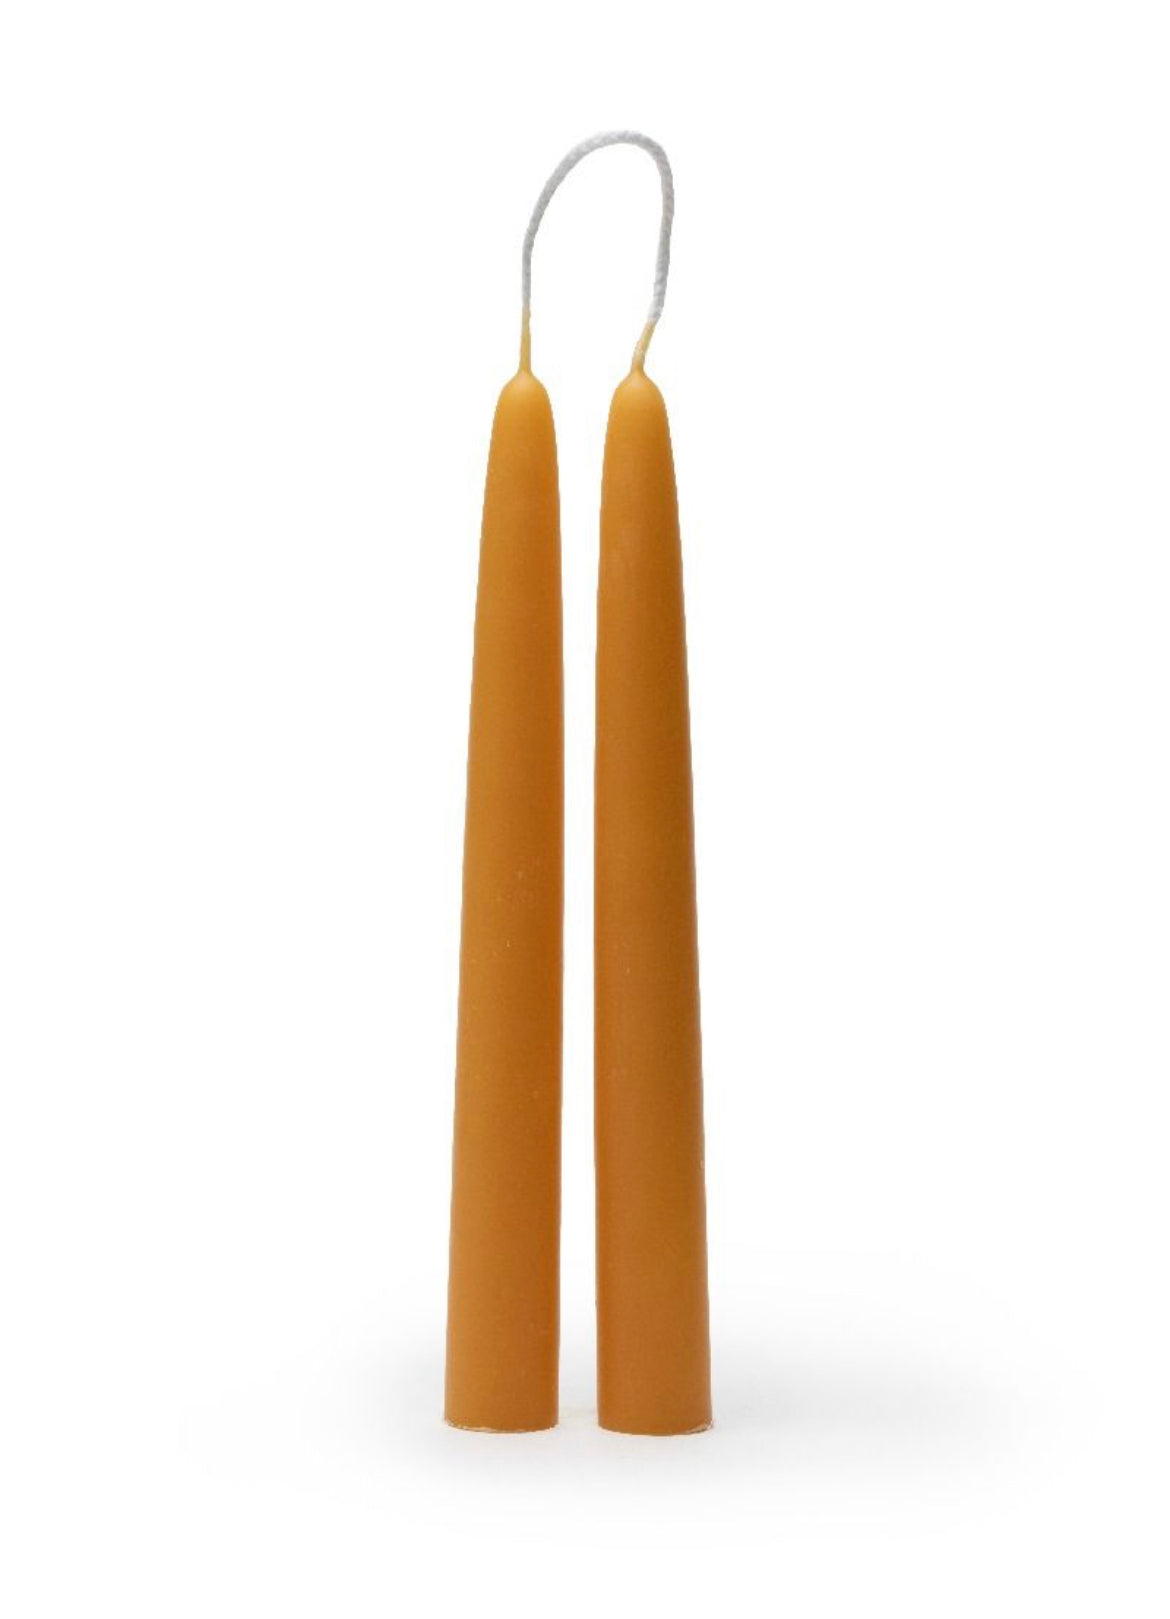 Dipam Beeswax Candles | Hand Dipped Taper Candles | 7.87”x0.87” - Alder & Alouette